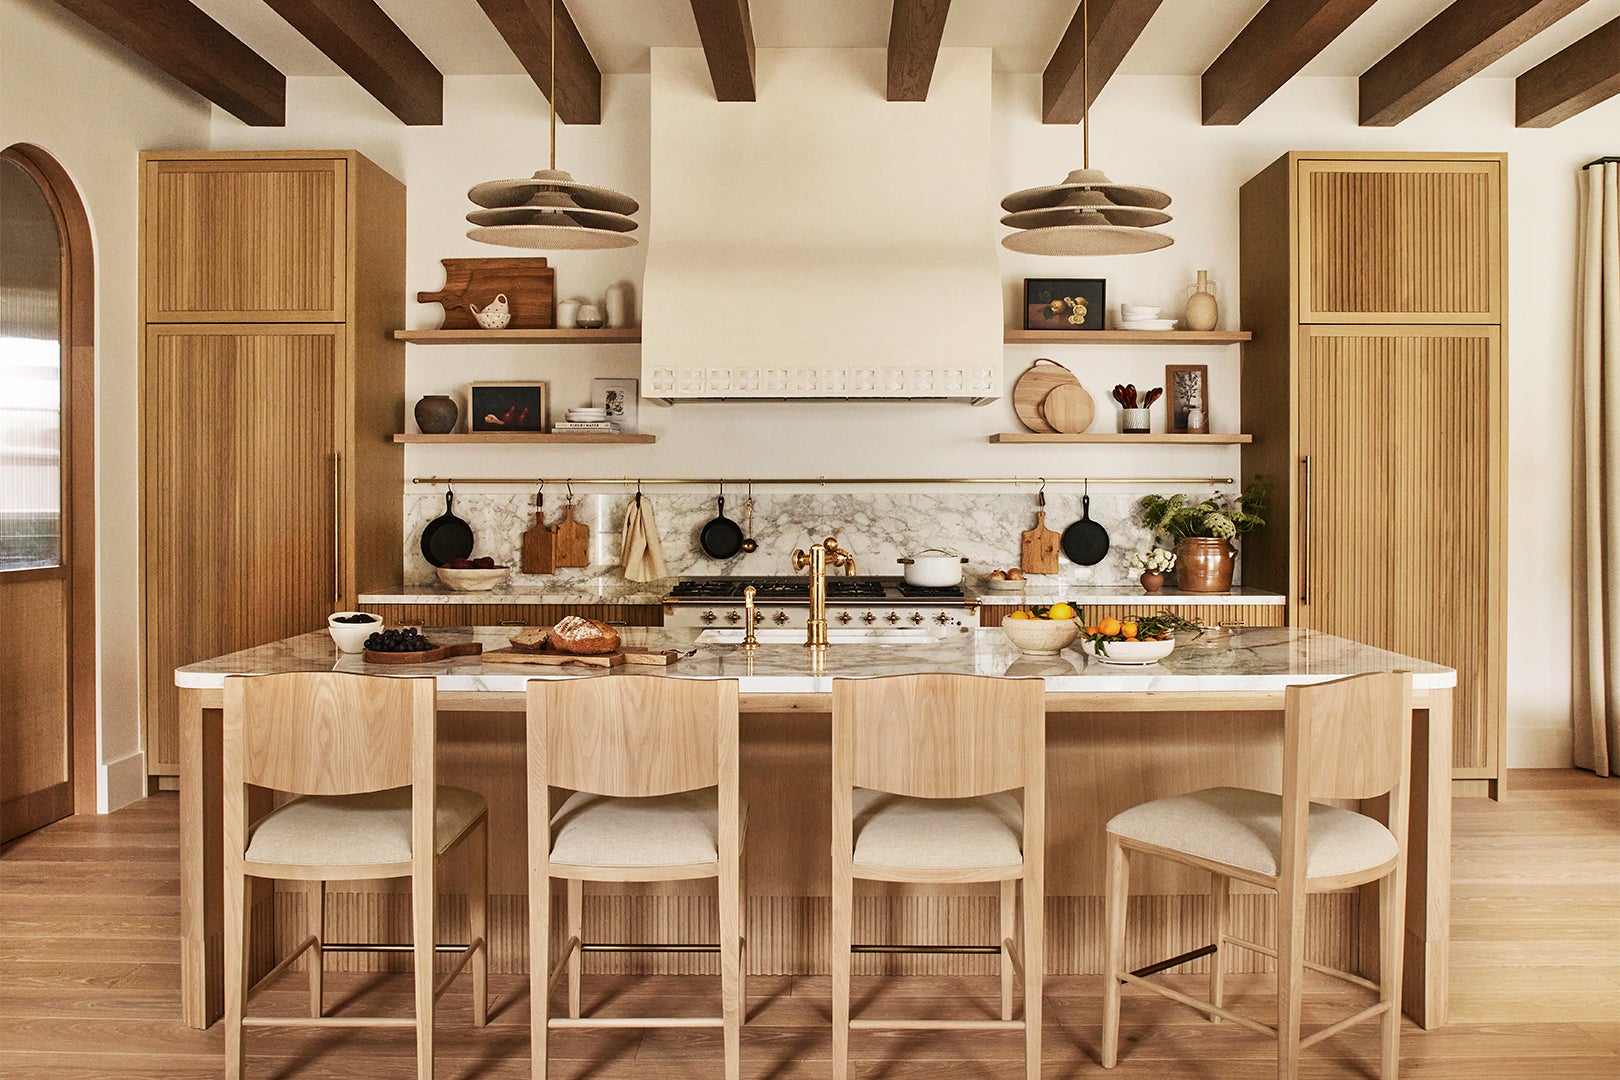 Kitchen island with wooden stools